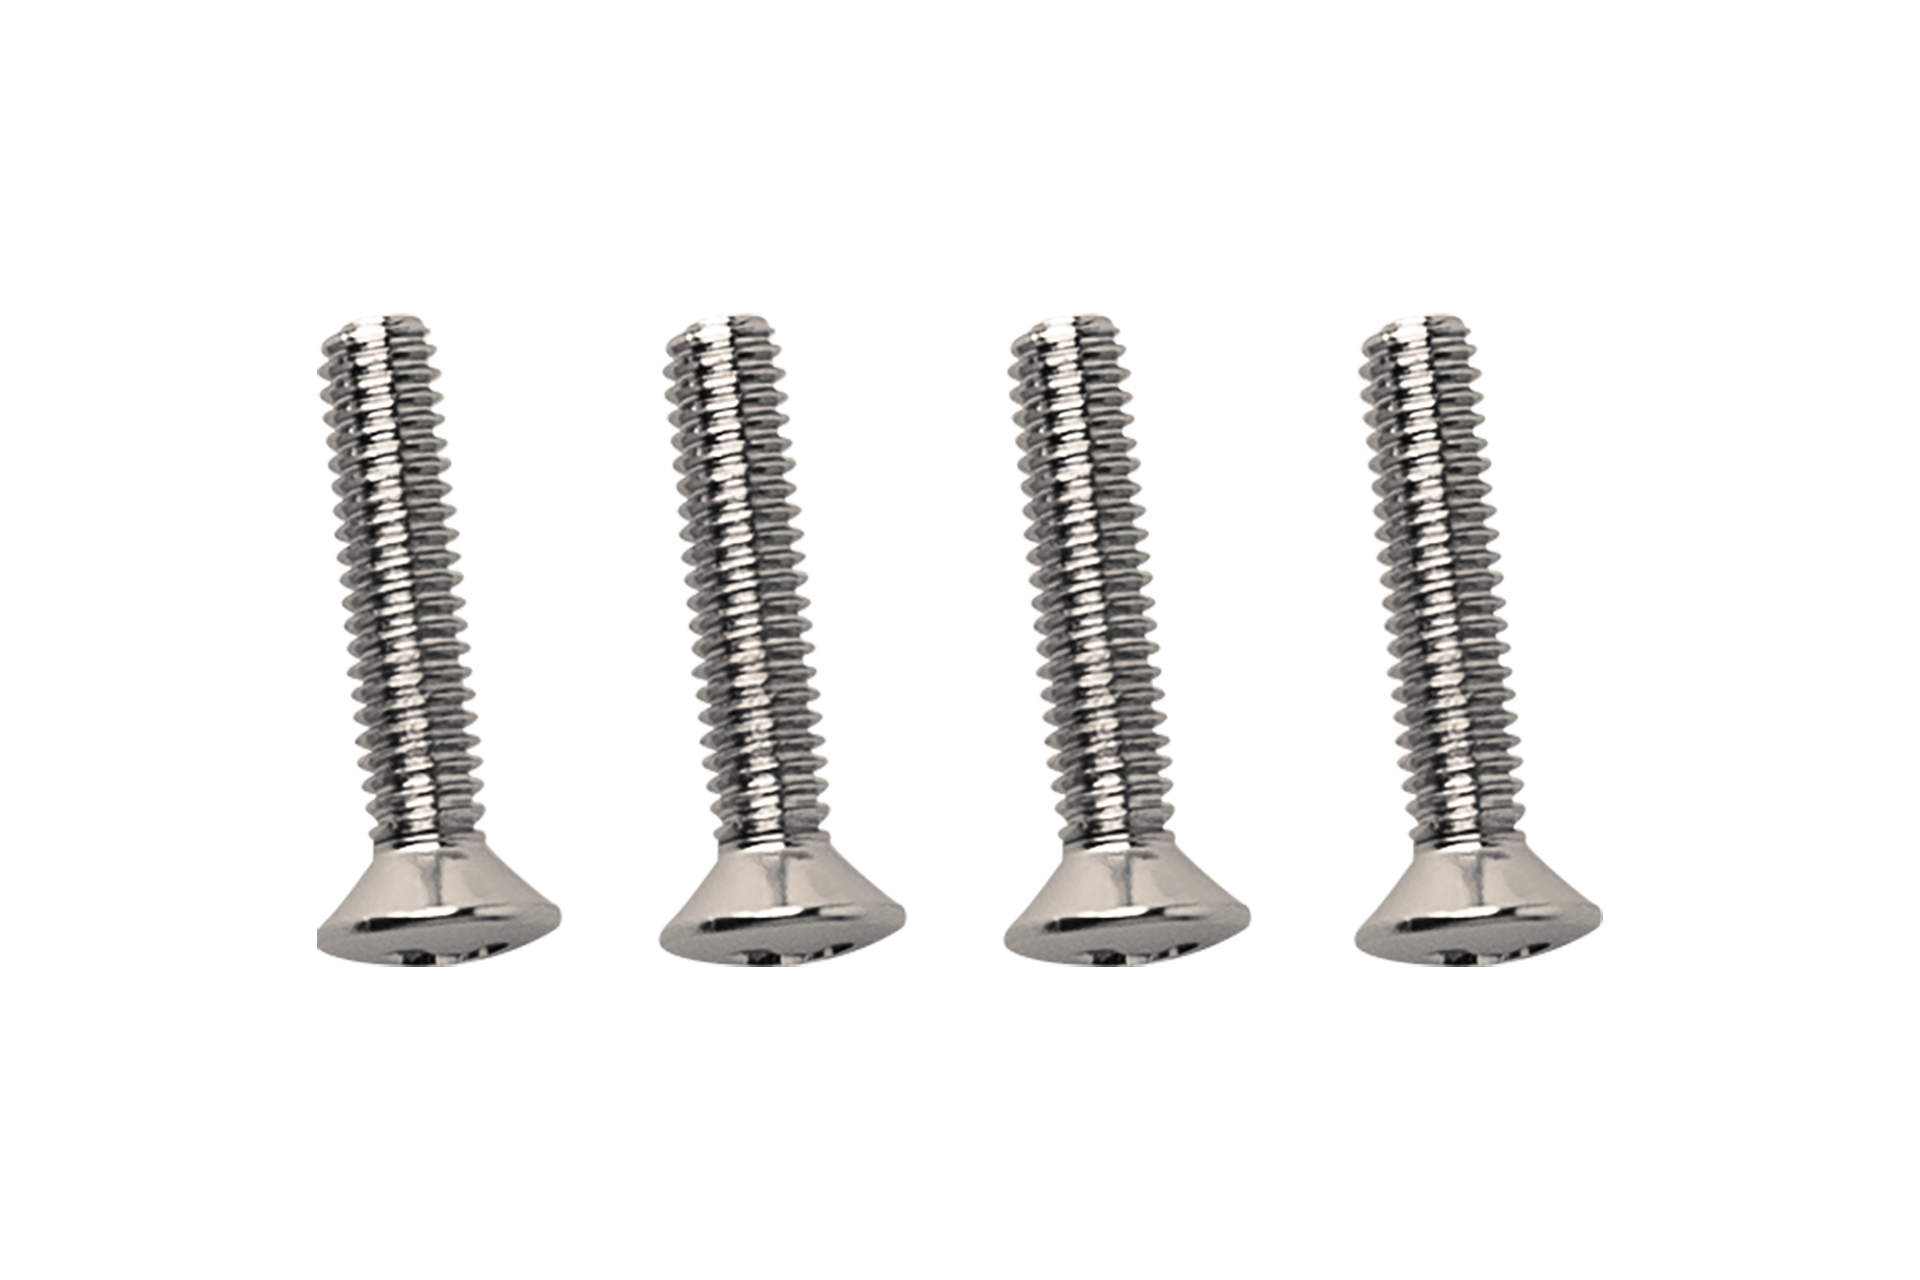 Sadowsky Parts - Countersunk Screw for Electronics Compartment Covers, M 2,5 mm x 12 mm, 4 pcs. - Stainless Steel